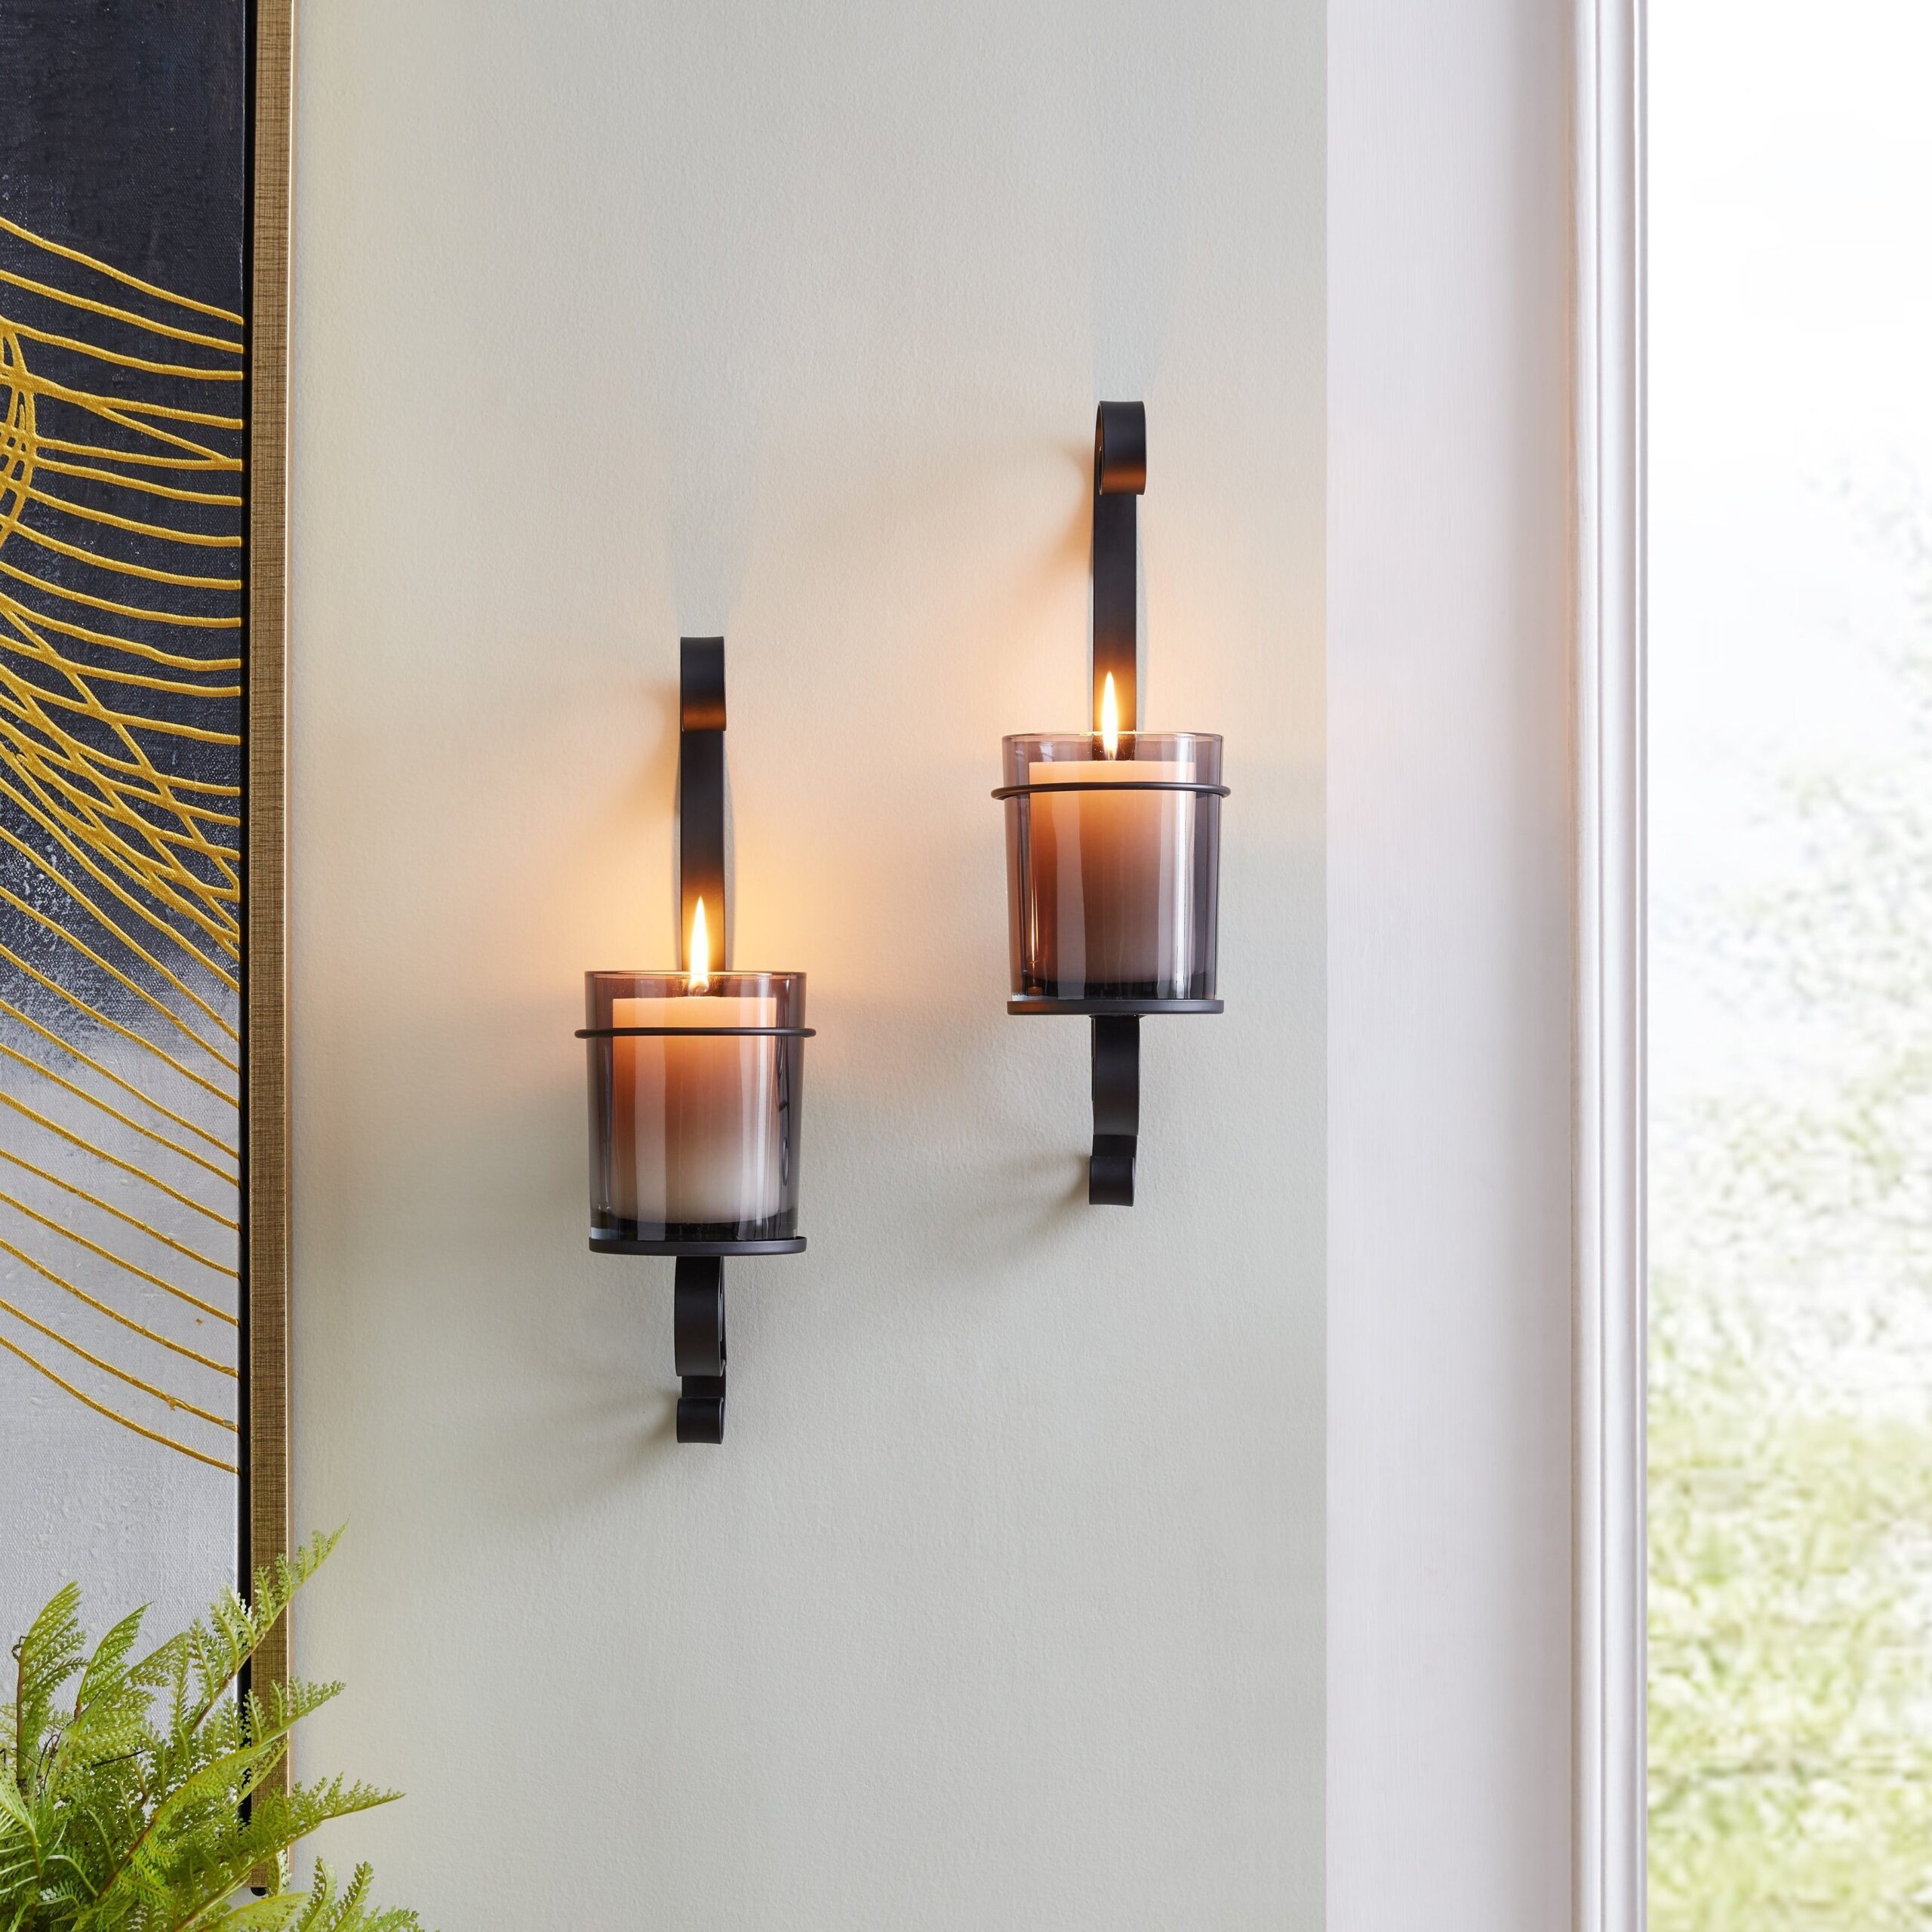 Enhance Your Home Decor with Stylish Metal Wall Decor Featuring Candle Holders